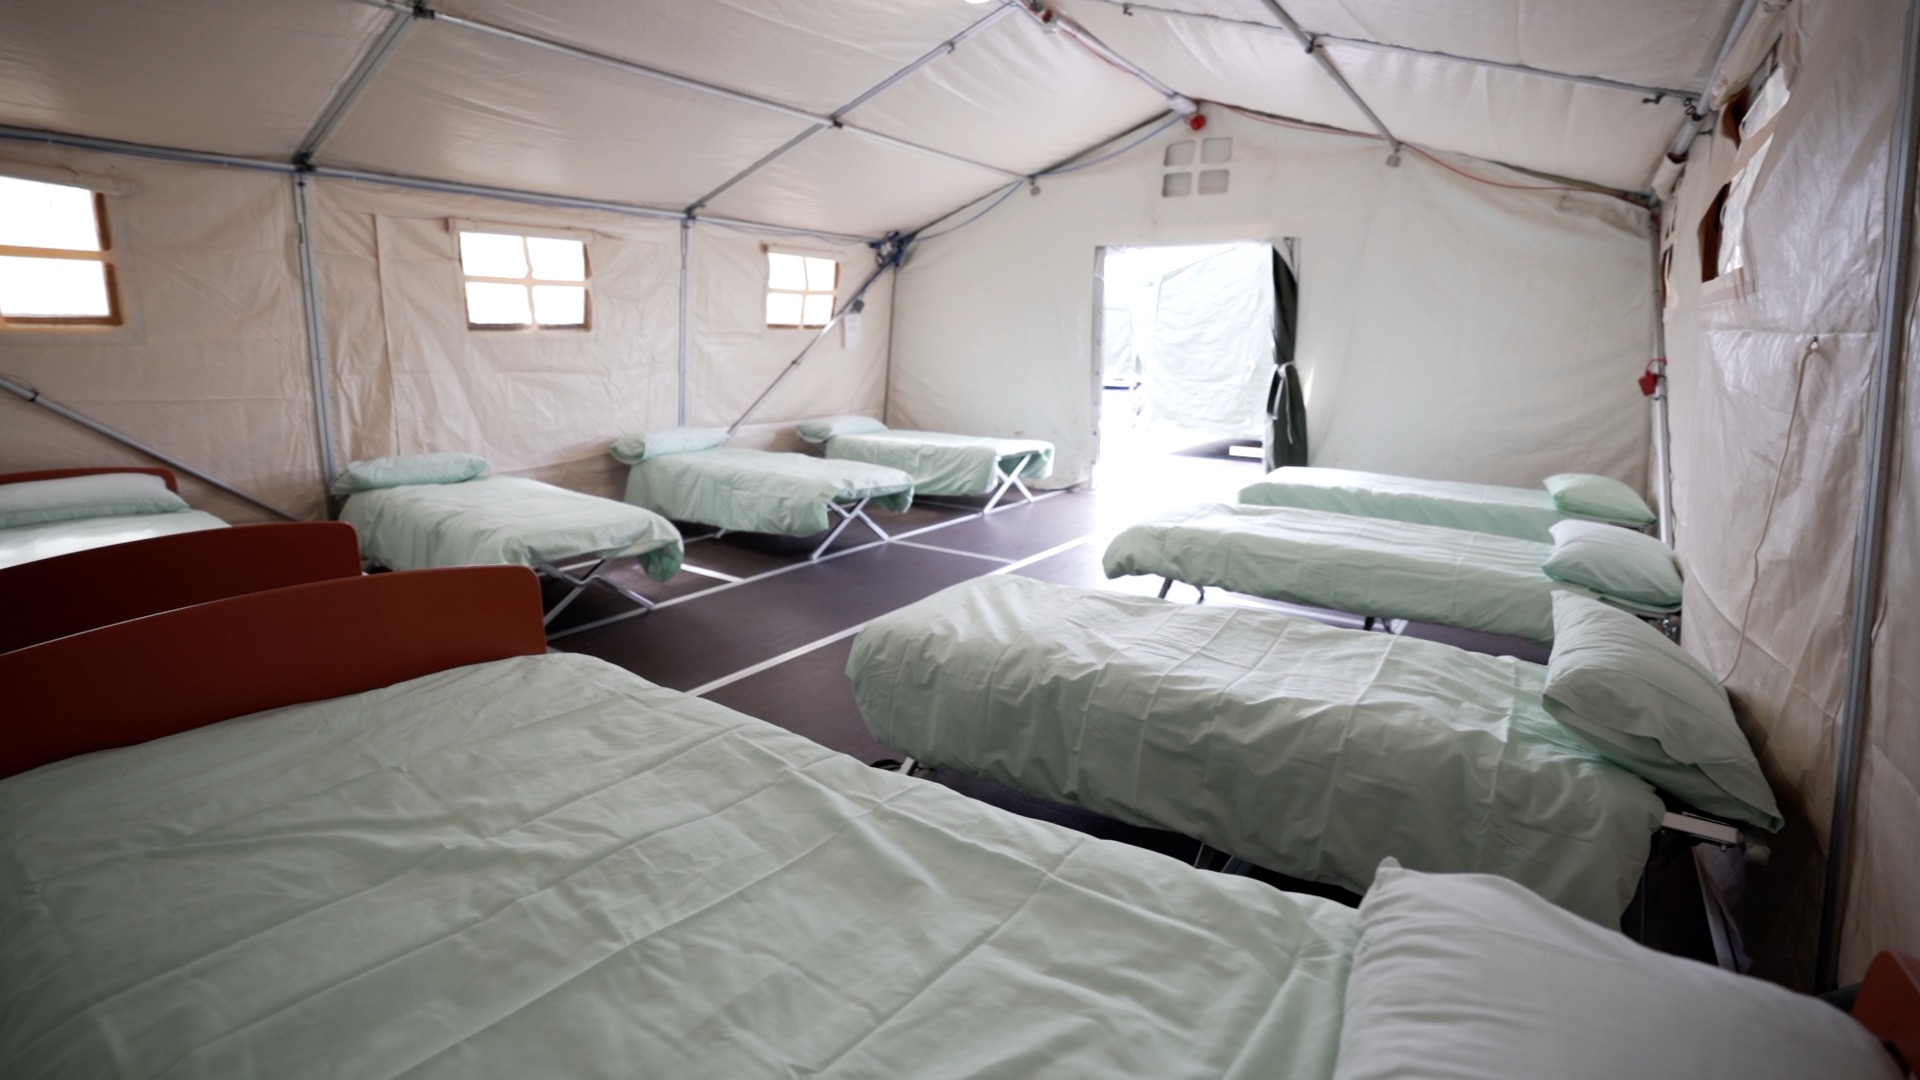 Beds at Gormanston Army Camp. Image: Department of Taoiseach.